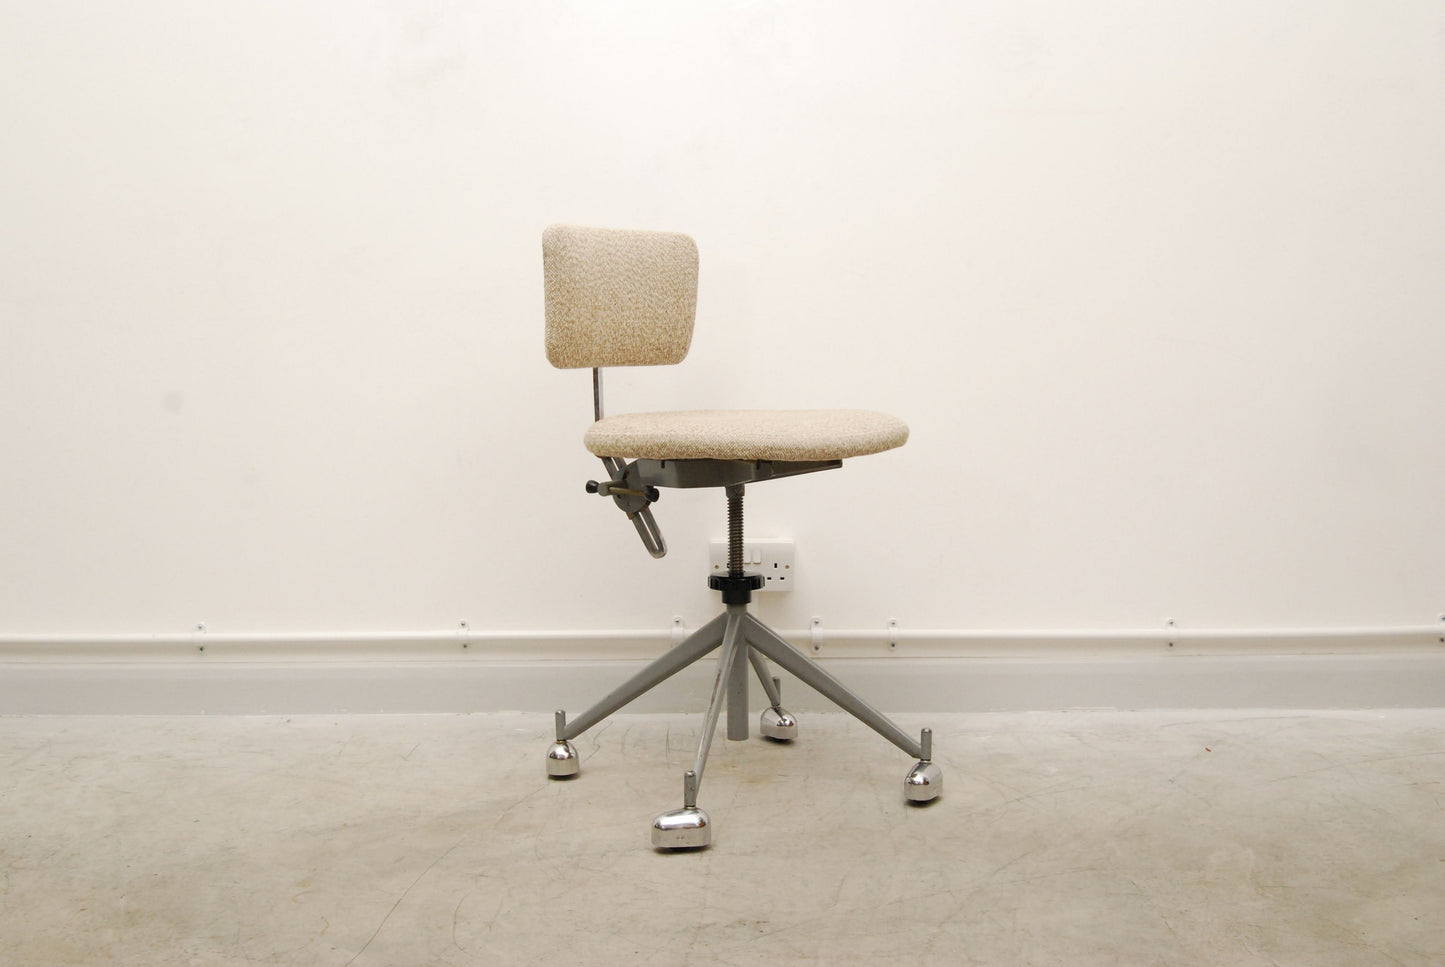 Desk/work chair by KEVI